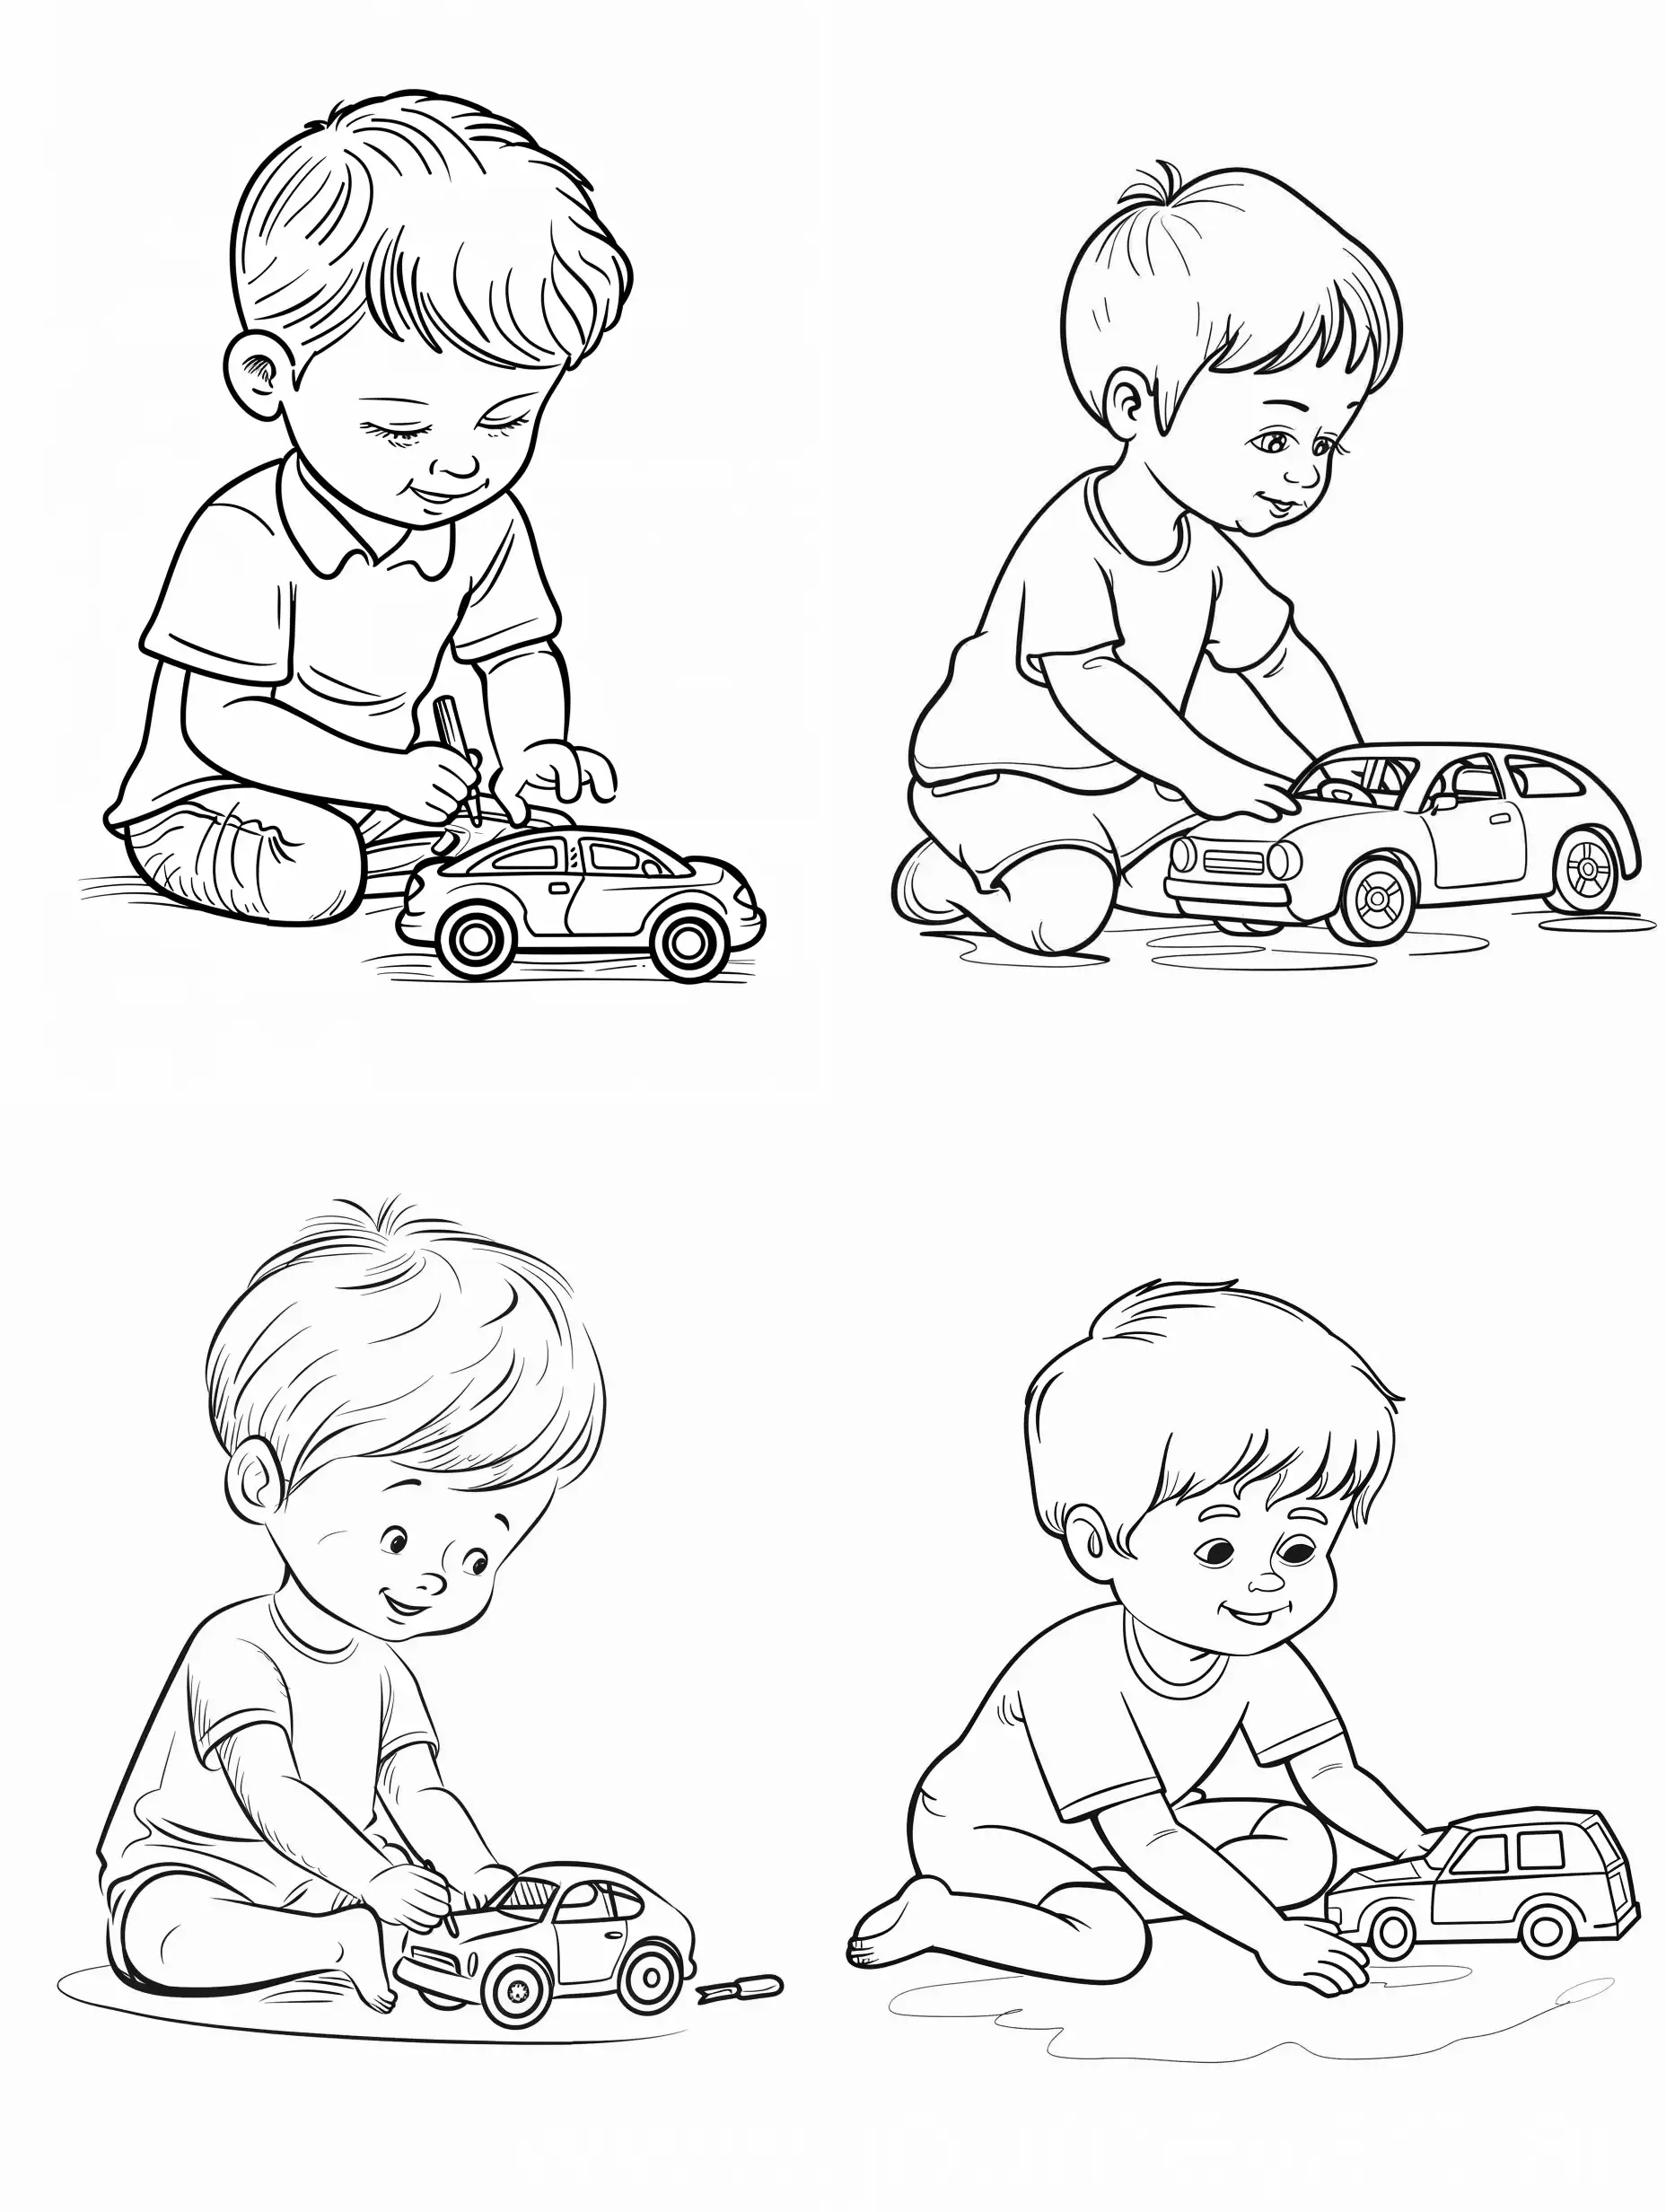 Child-Playing-with-Toy-Car-Minimalist-Outline-Drawing